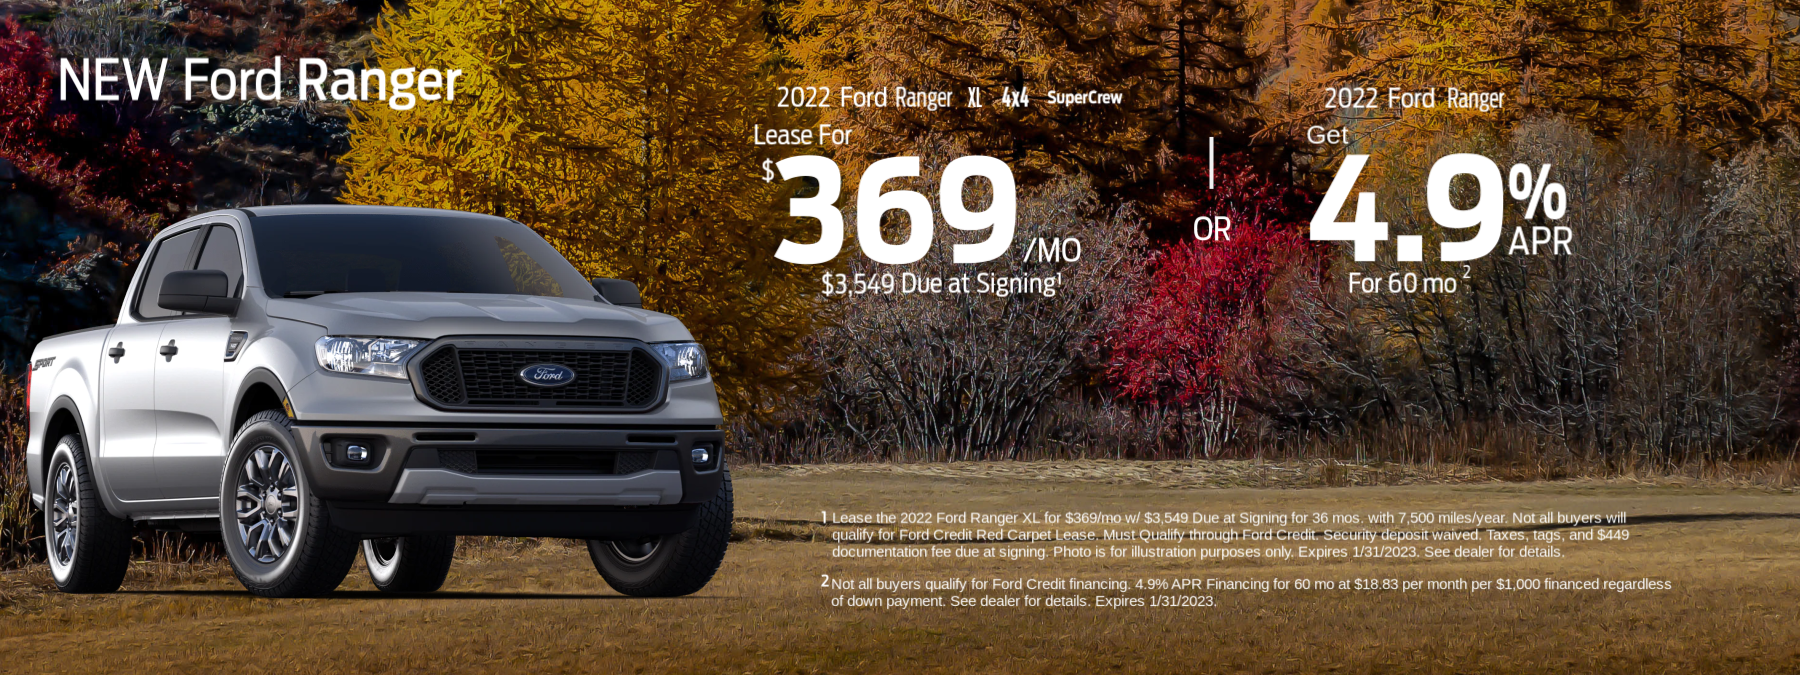 Check out new Ford Ranger offers!